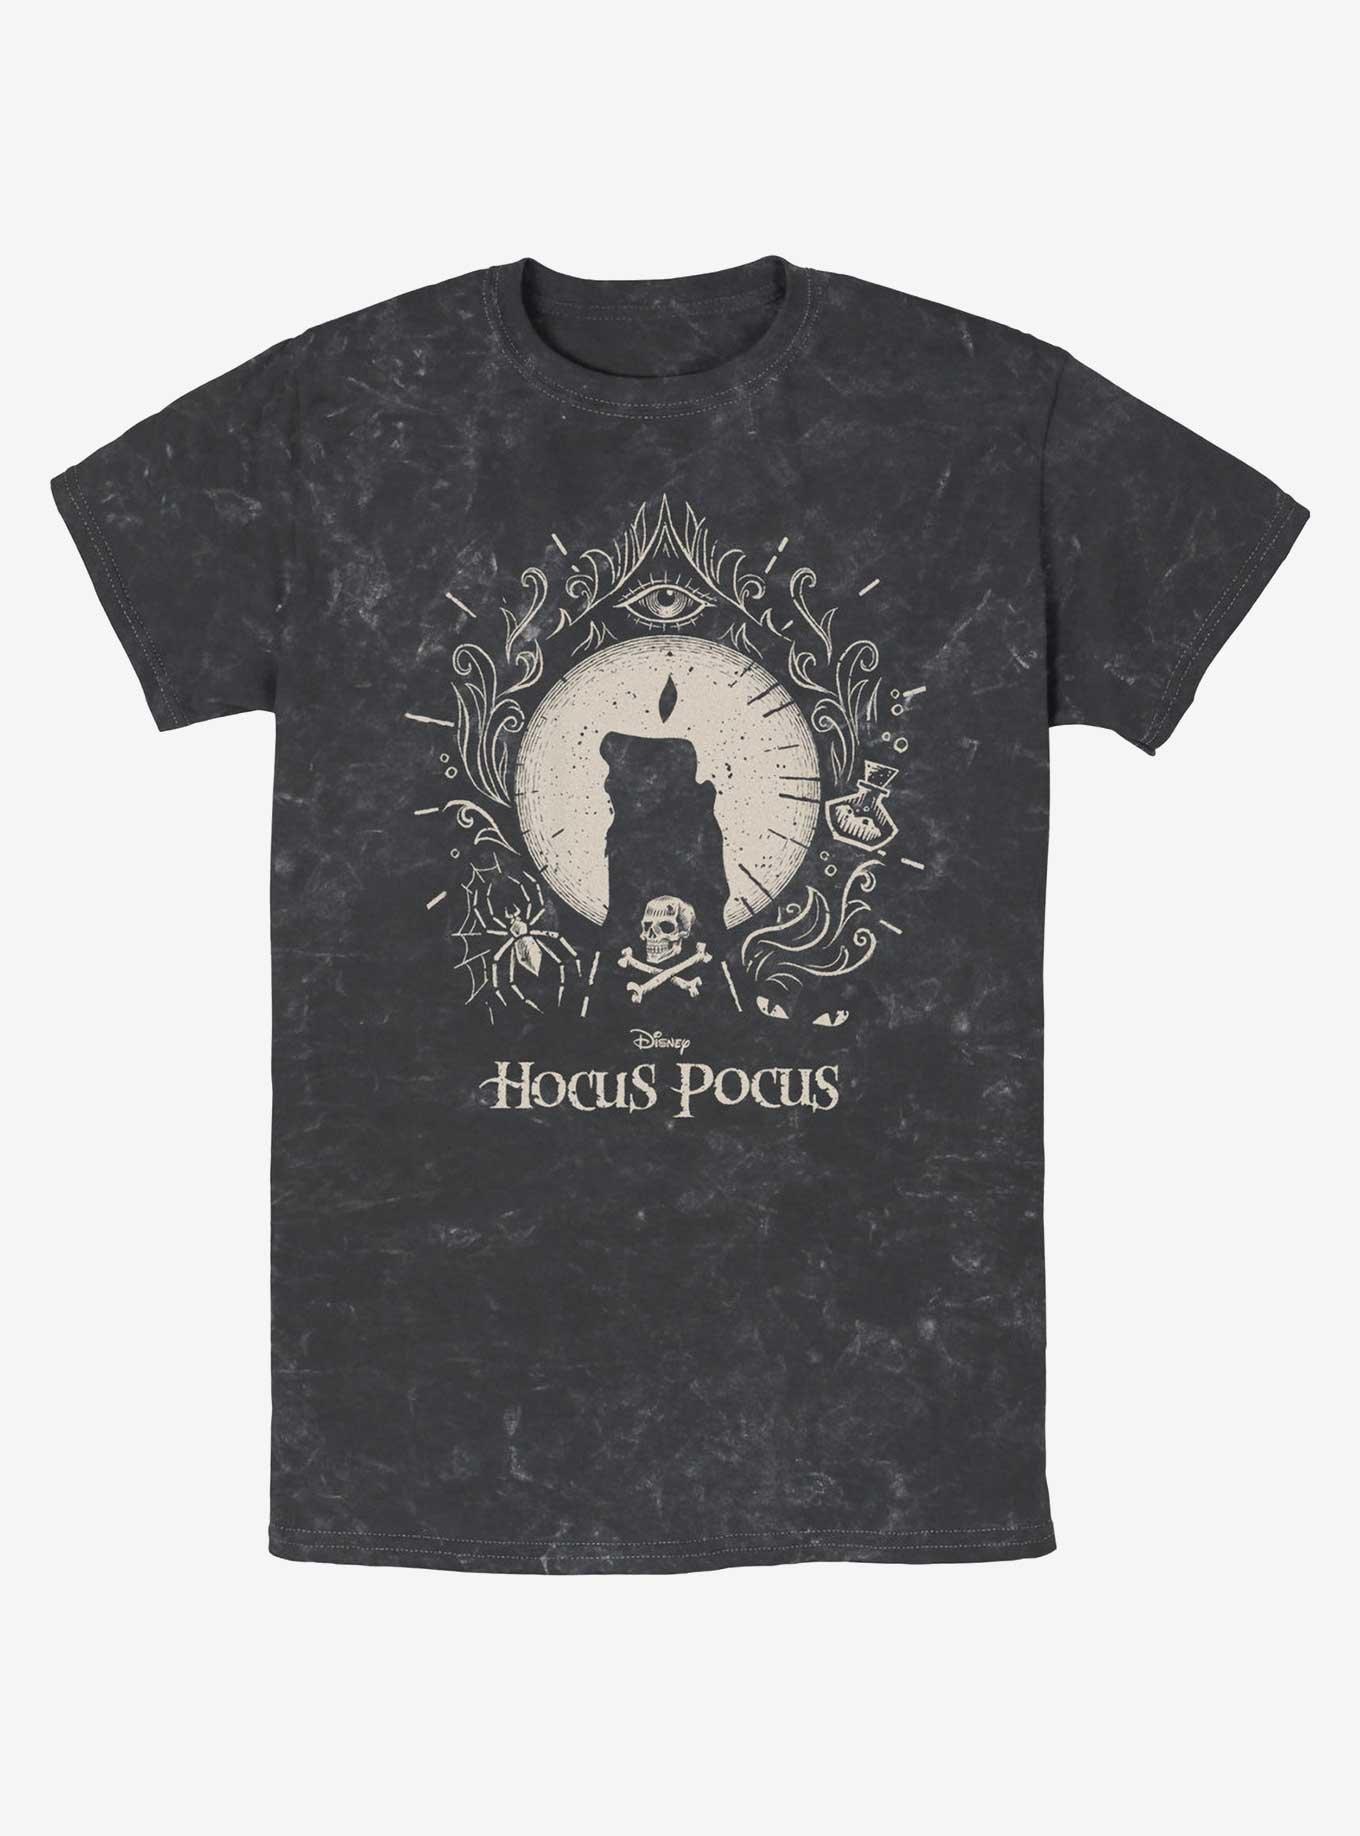 Disney Hocus Pocus Black Flame Tank Top, 107 of the Year's Best Hocus  Pocus Merch — Shop These Devilish Delights Before They Fly Off Shelves